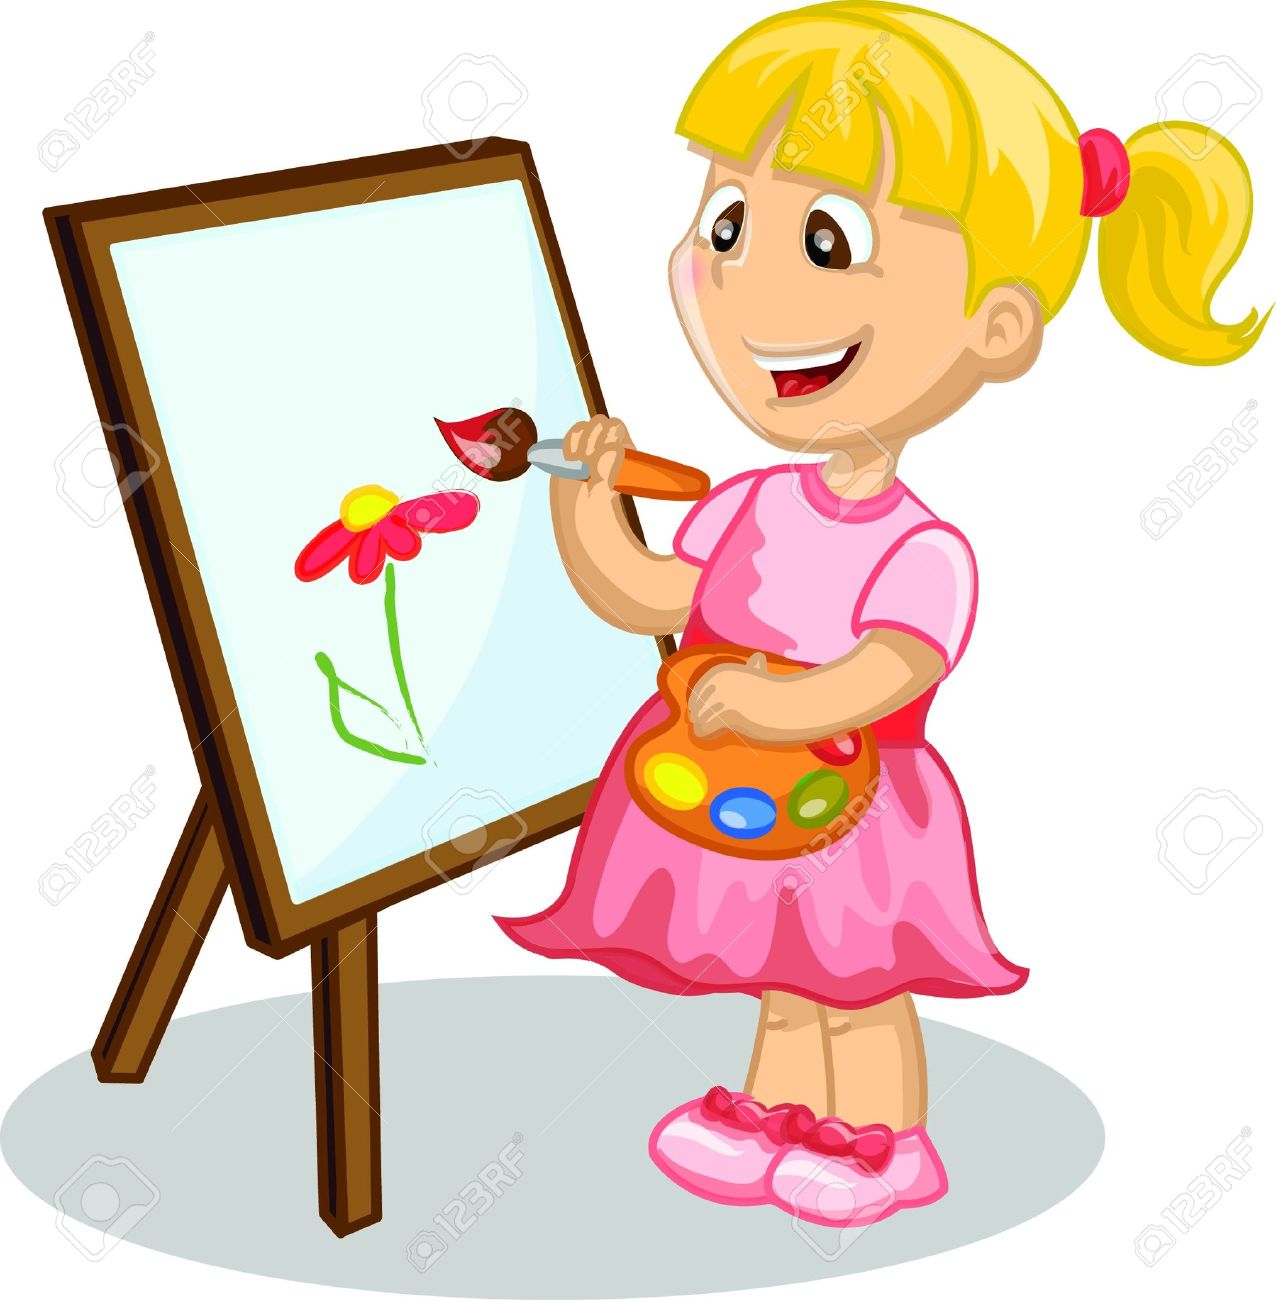 Painter clipart student, Painter student Transparent FREE for download